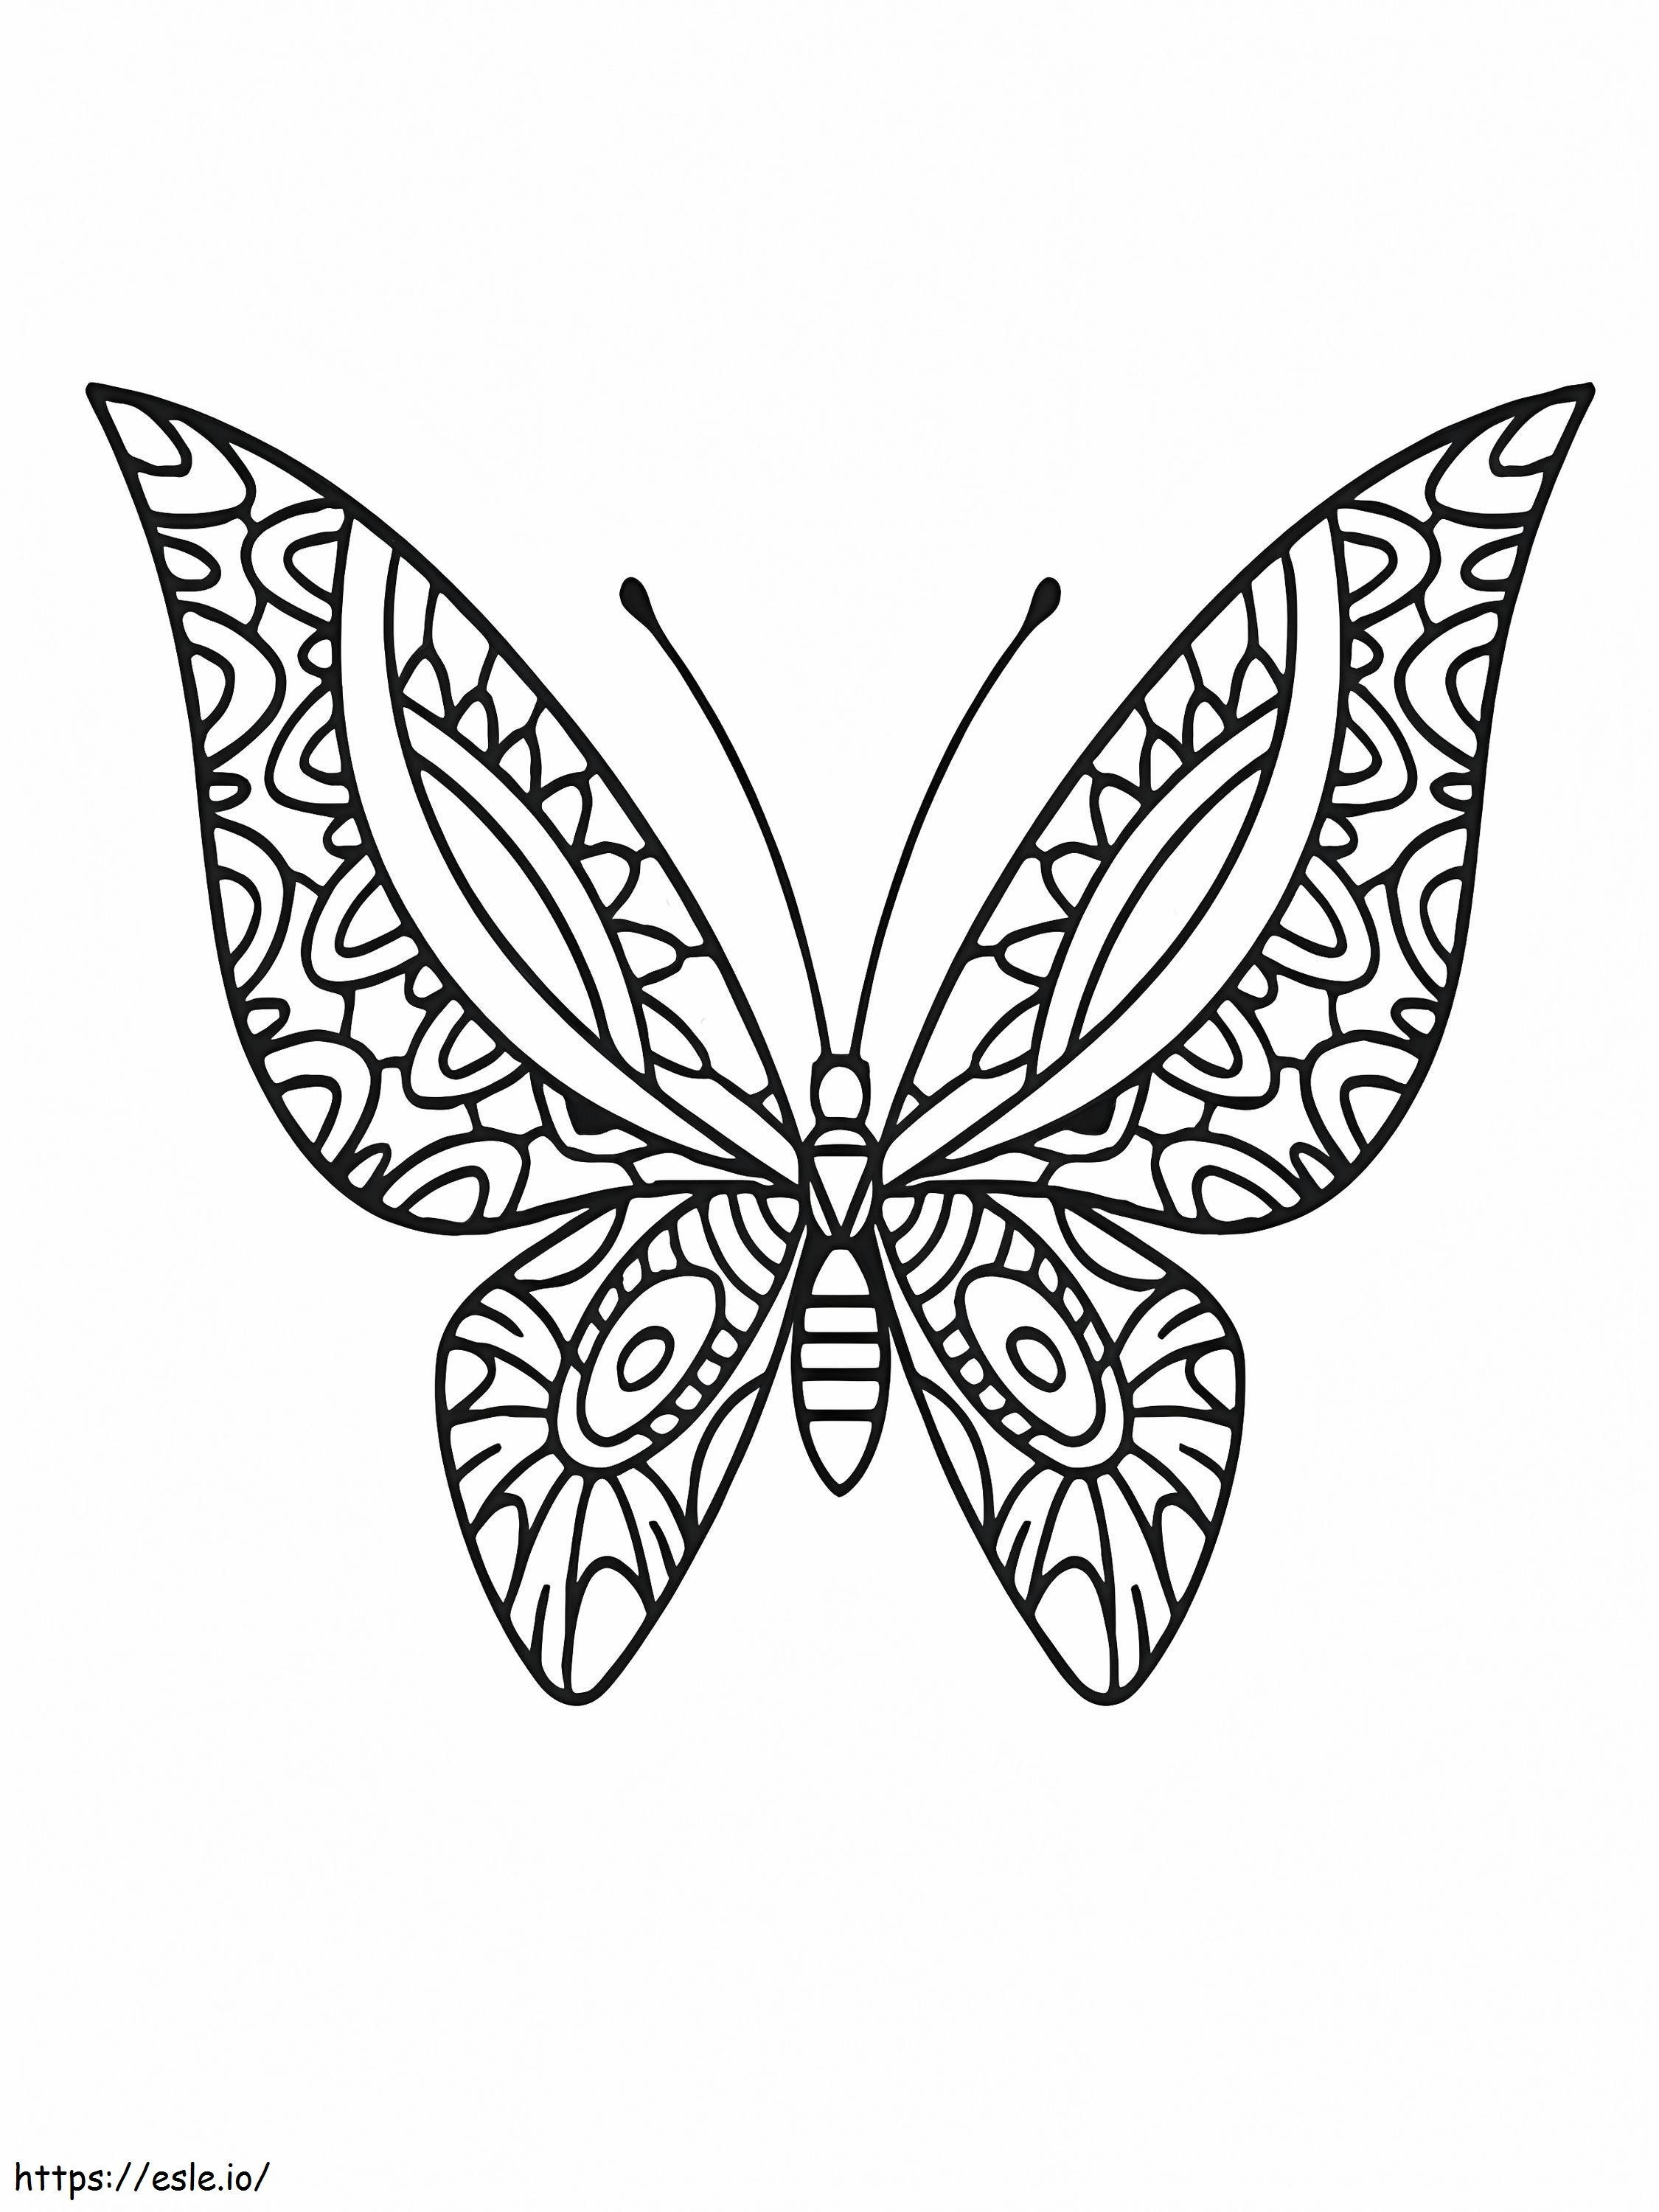 Exquisite Butterfly coloring page